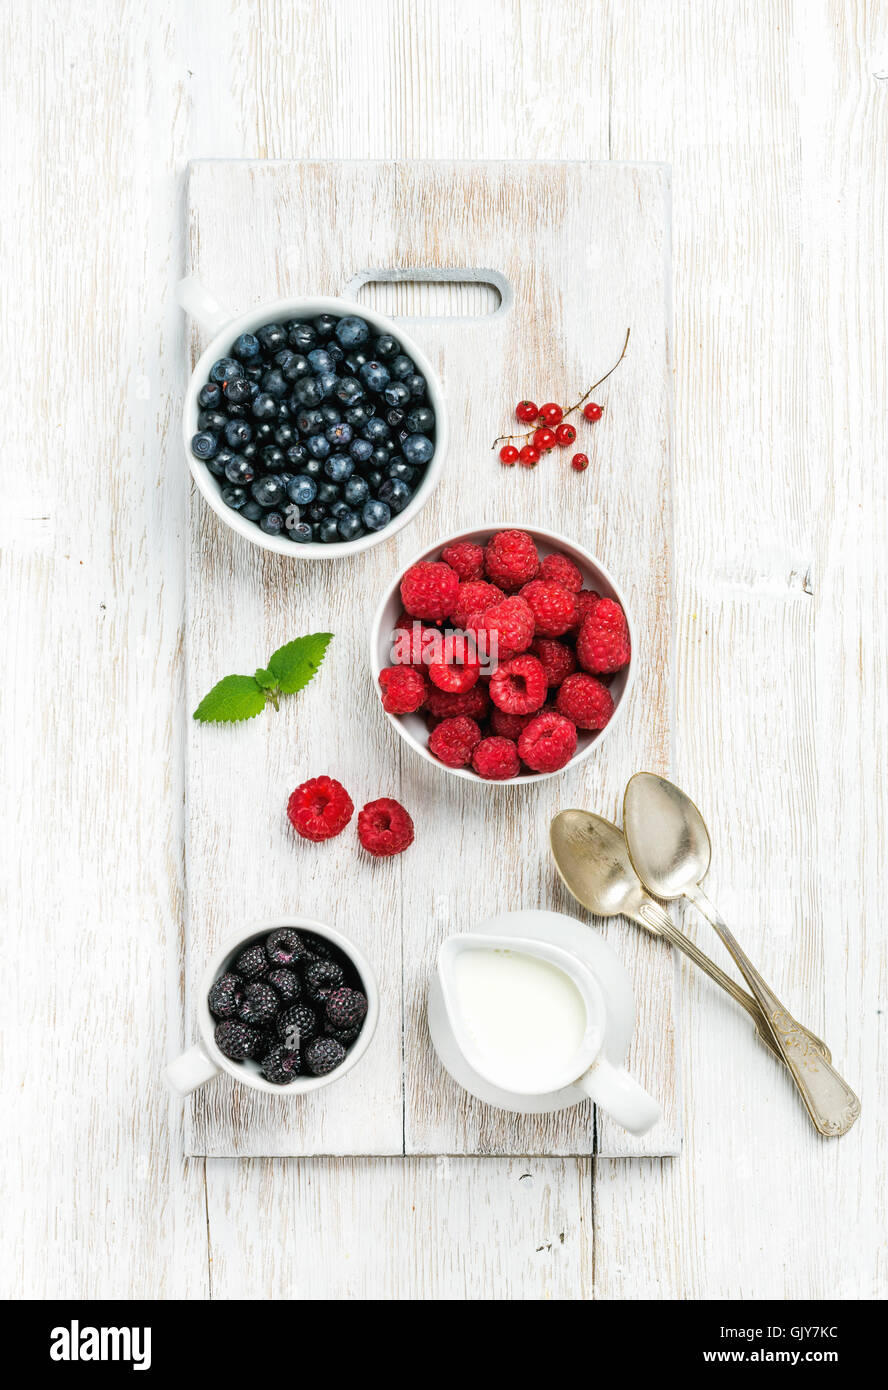 Raspberries, blackberries and bilberries in bowls served with fresh mint, red currant and milk on white painted wooden backgroun Stock Photo